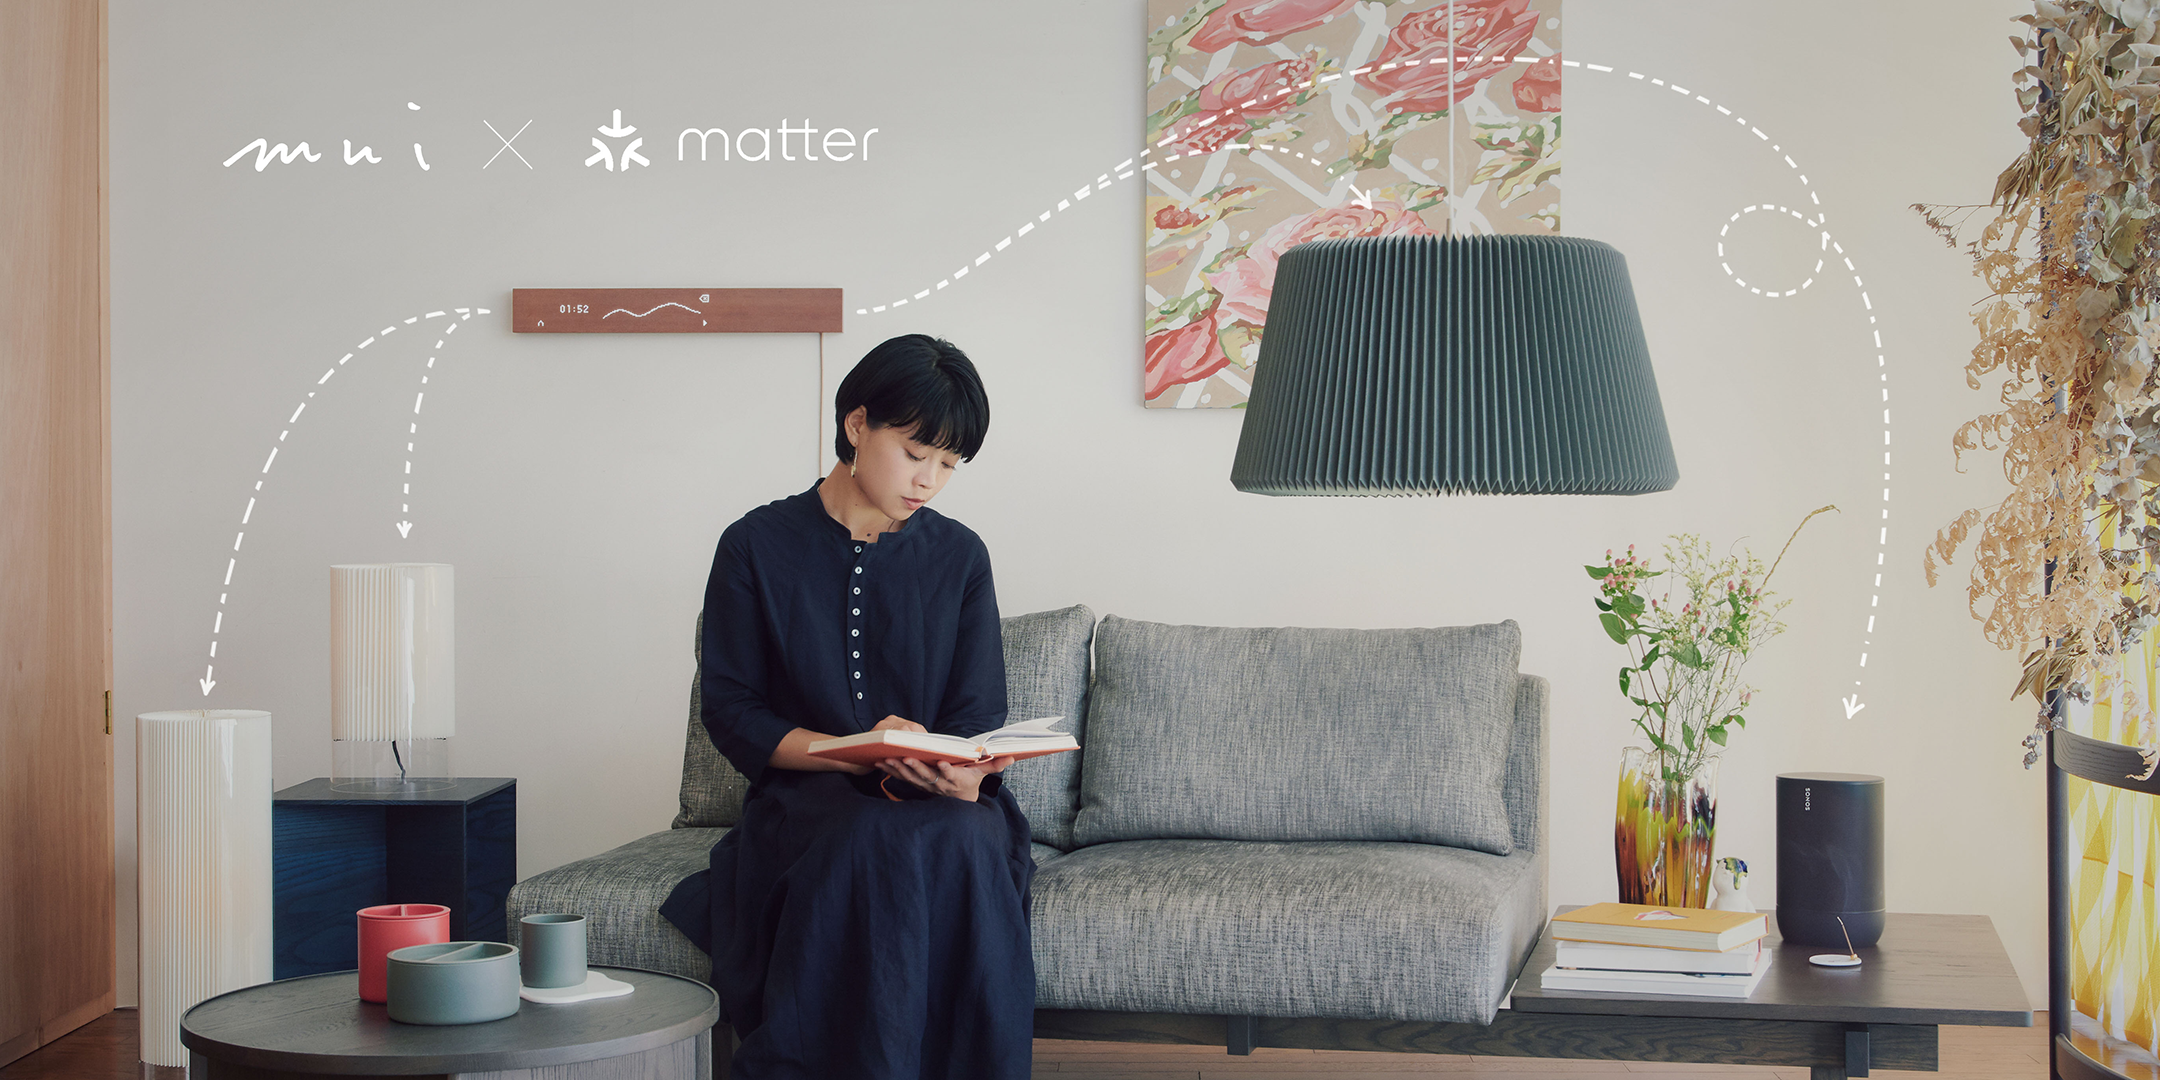 mui Lab to Release Matter Version of Its Signature Smart Home Interface to Foster Family Bonds